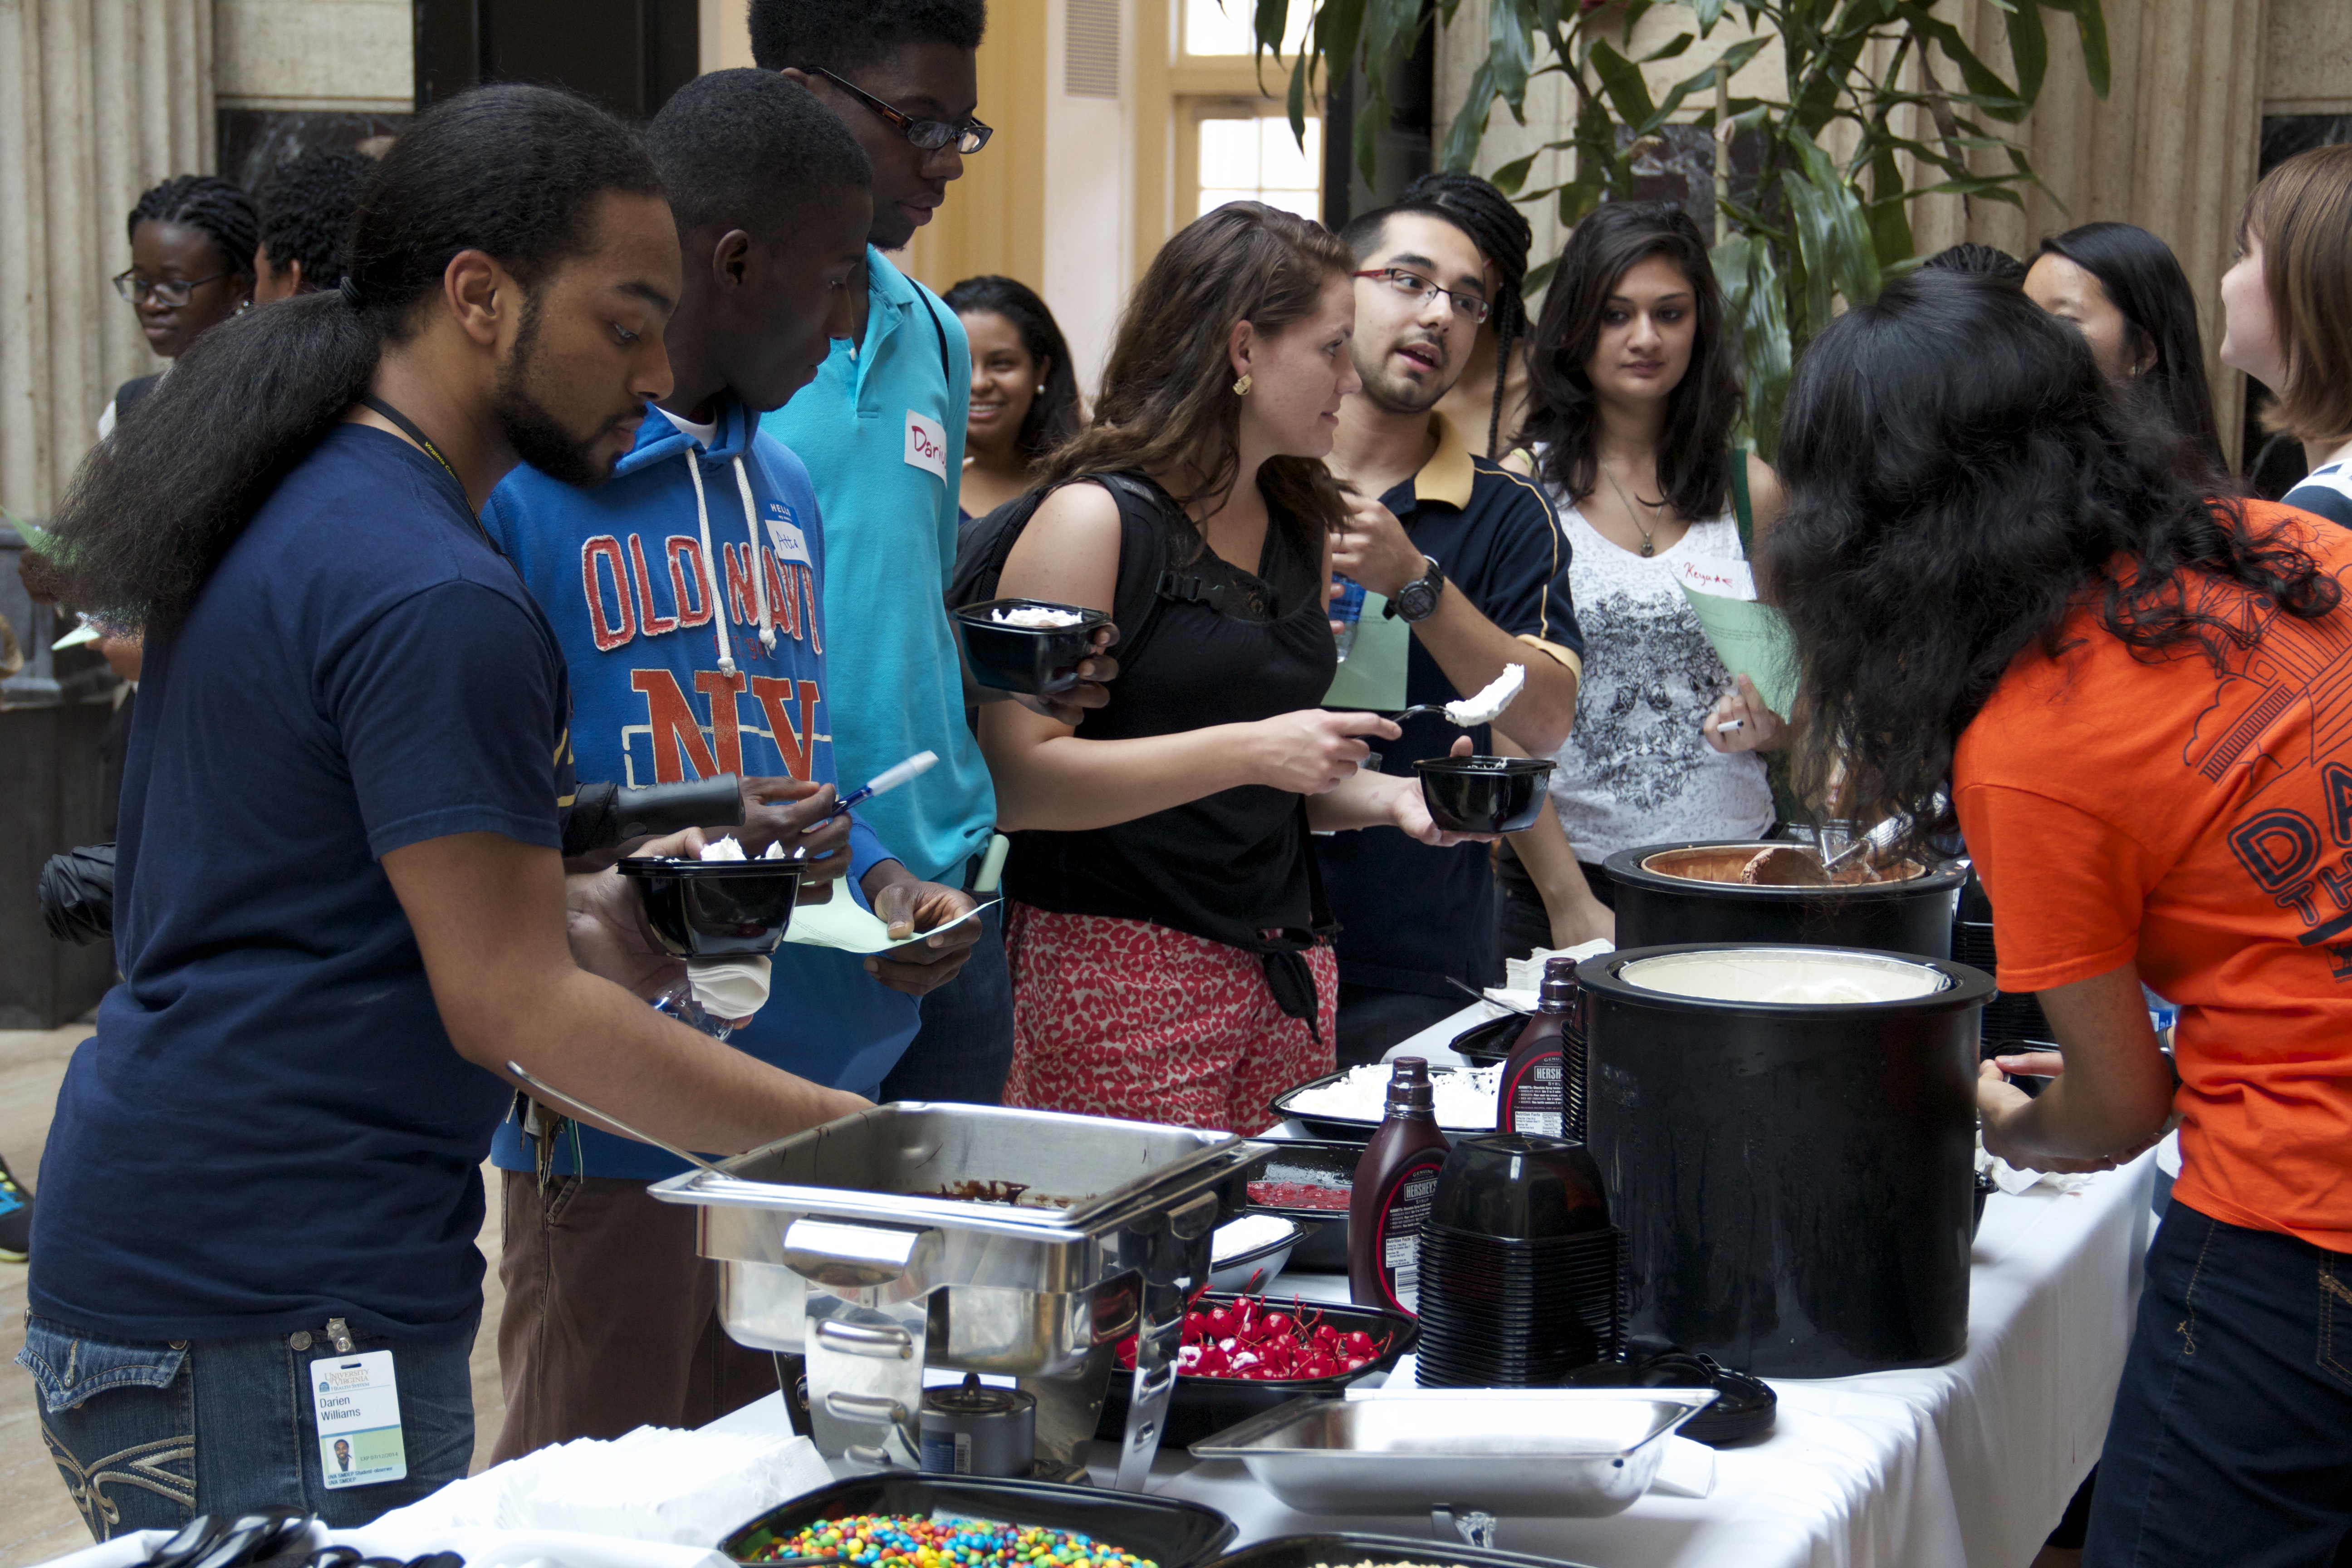 Students serving other students ice cream at an ice cream social